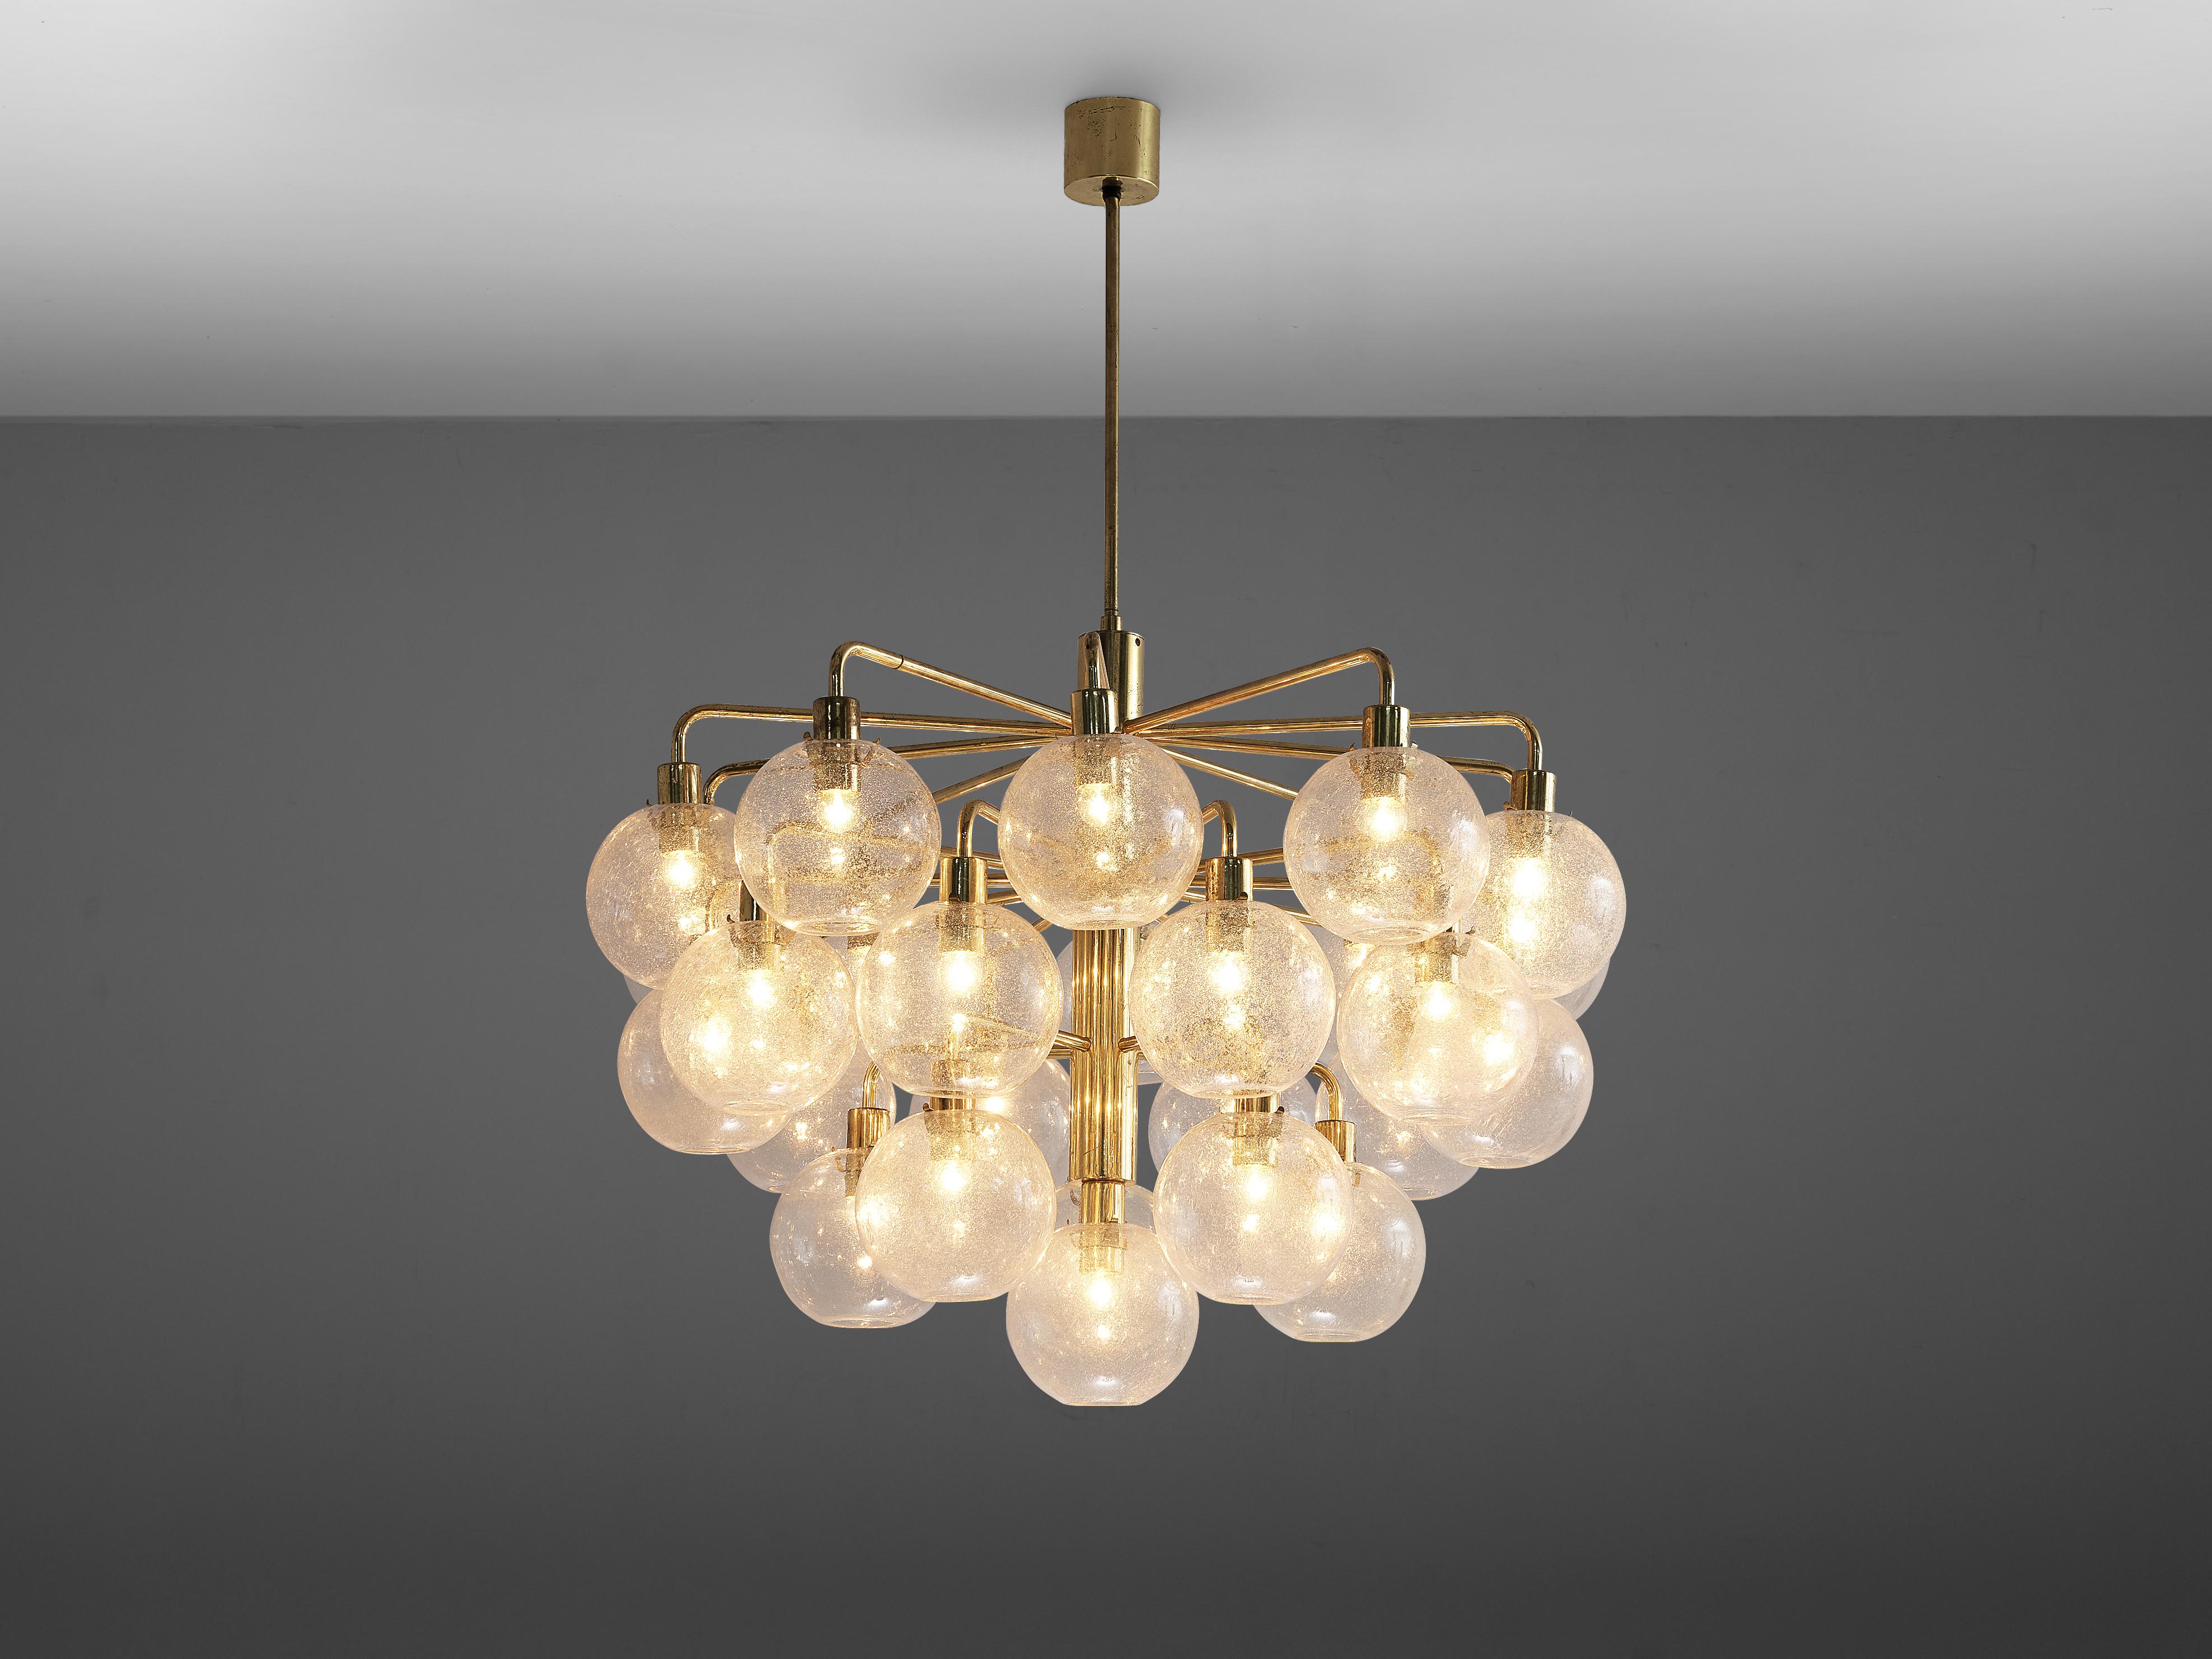 Hans-Agne Jakobsson for Hans-Agne Jakobsson AB in Markaryd, chandelier, brass, glass, Sweden, 1960s 

This impressive chandelier is designed by Hans-Agne Jakobsson. A bright source of elegance and light, this piece is able to provide realm and lift